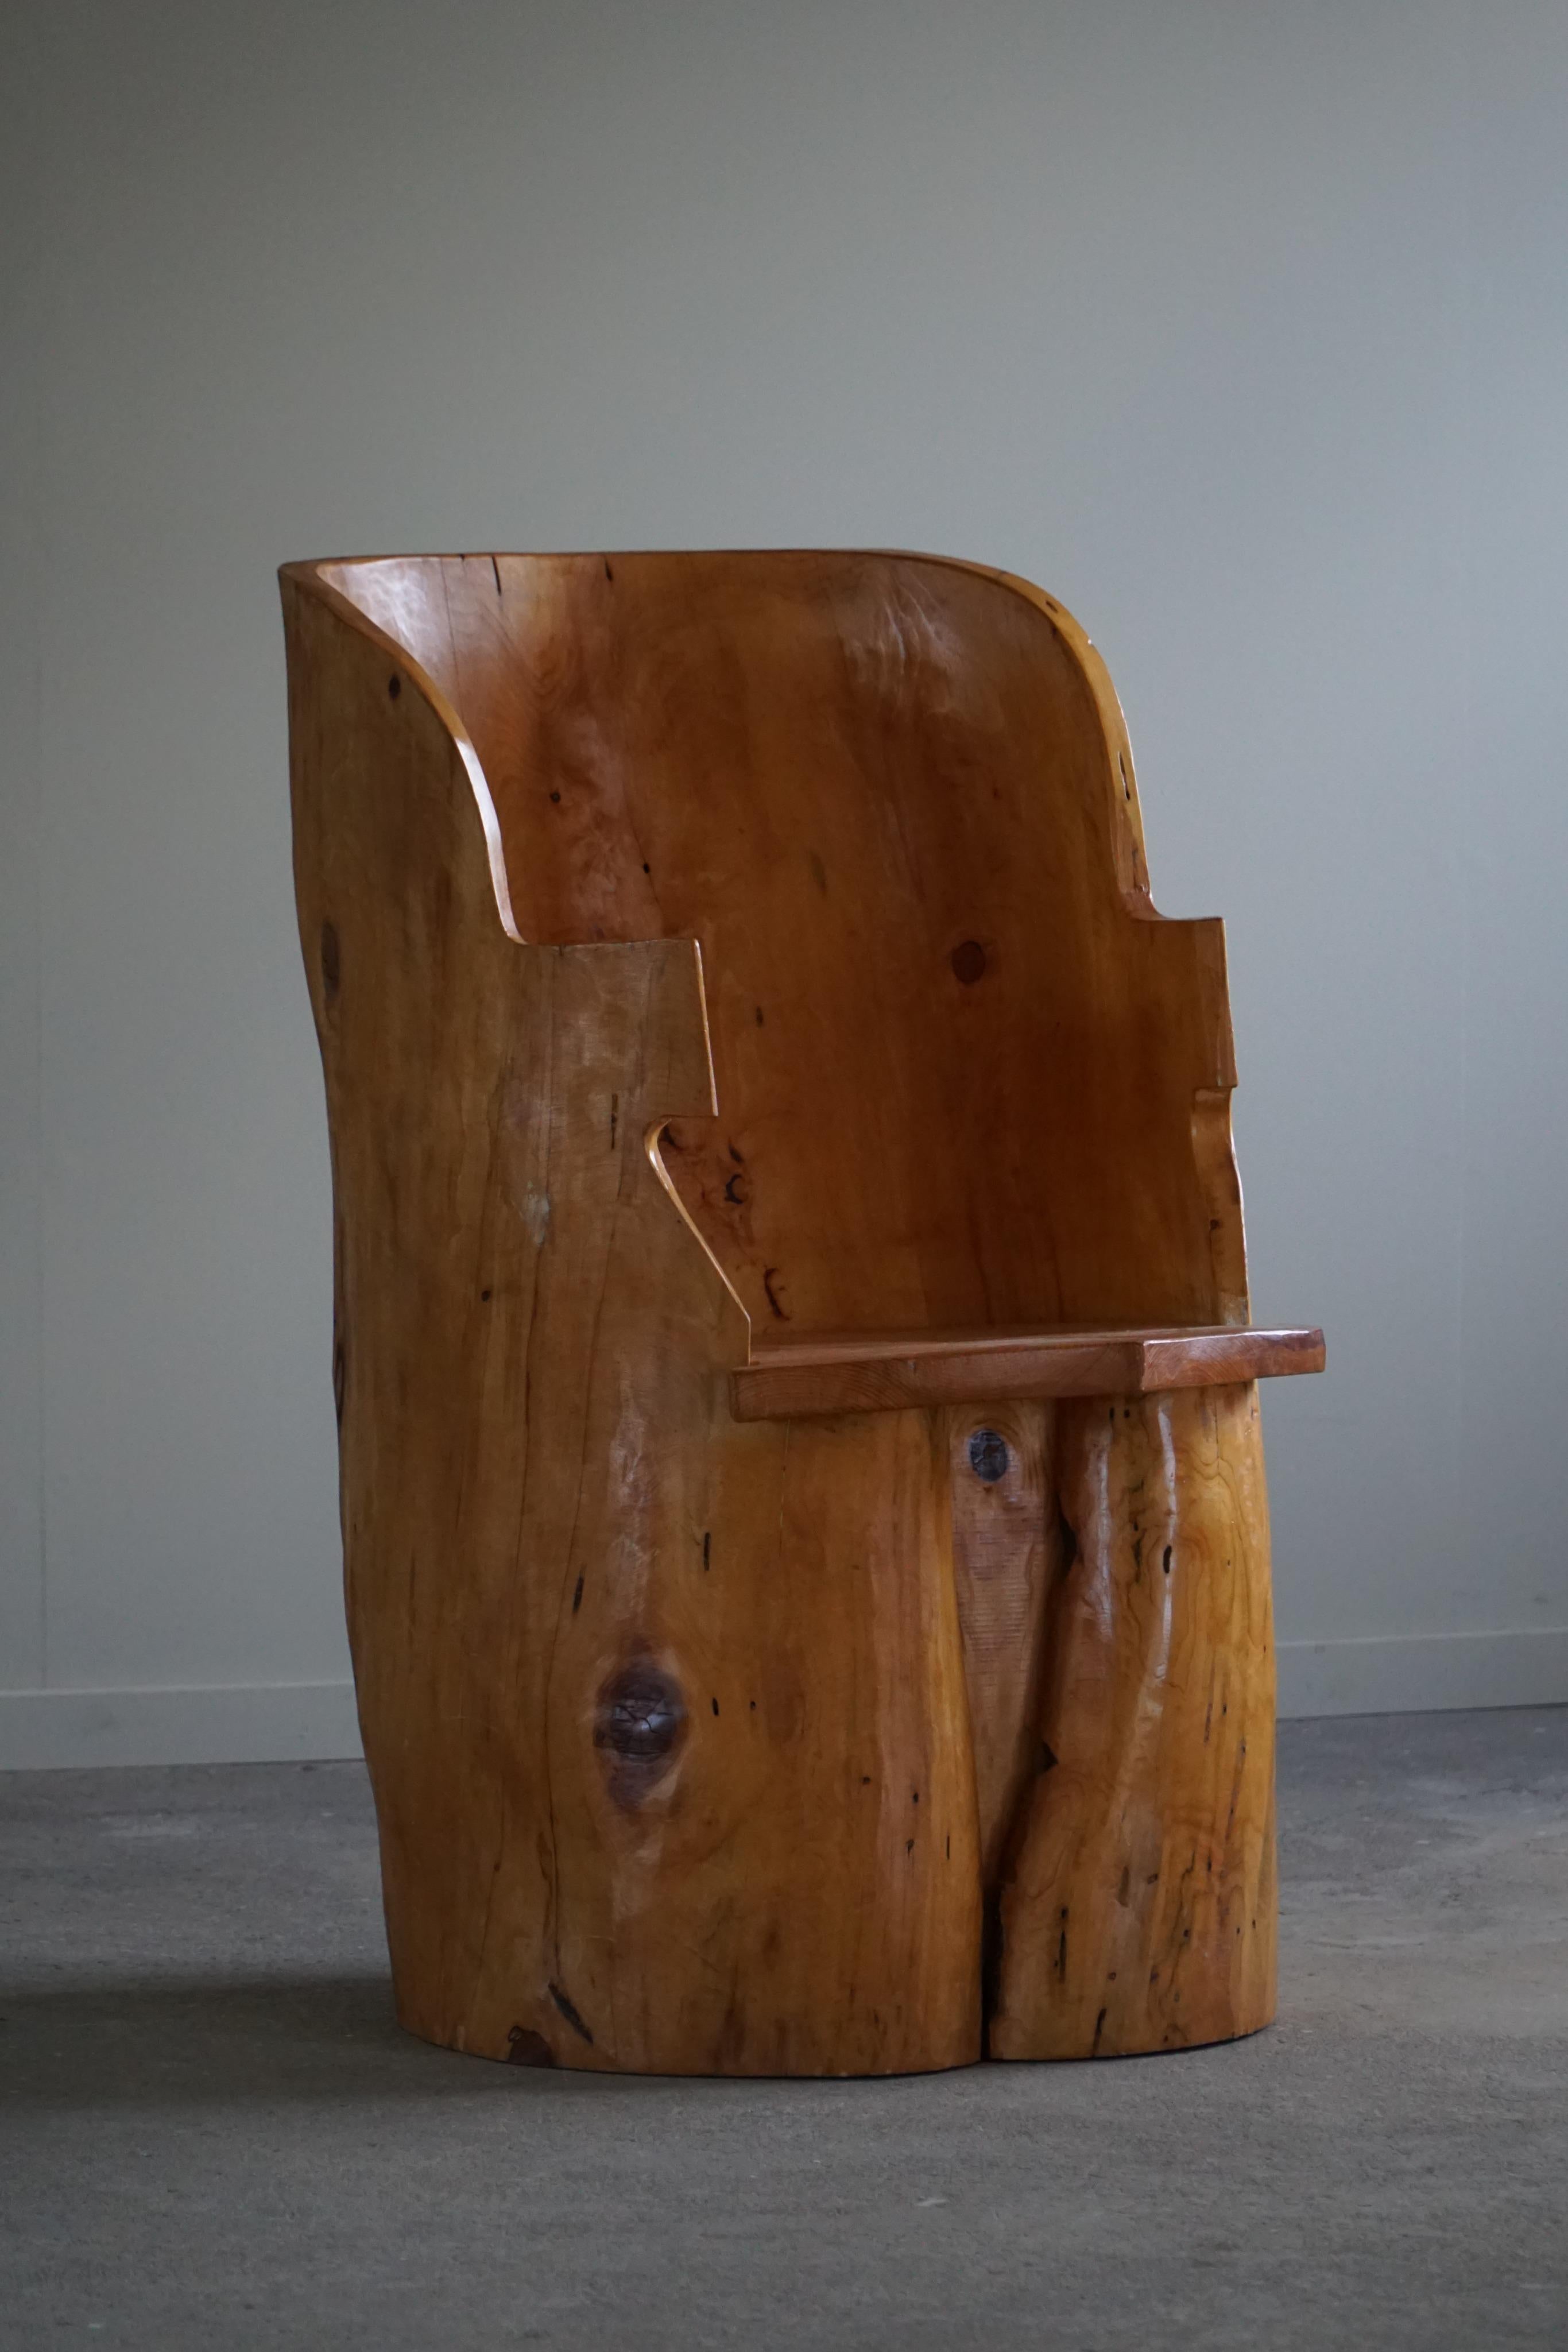 Stump Chair in Solid Birch by a Swedish Cabinetmaker, Wabi Sabi, 1950s For Sale 10